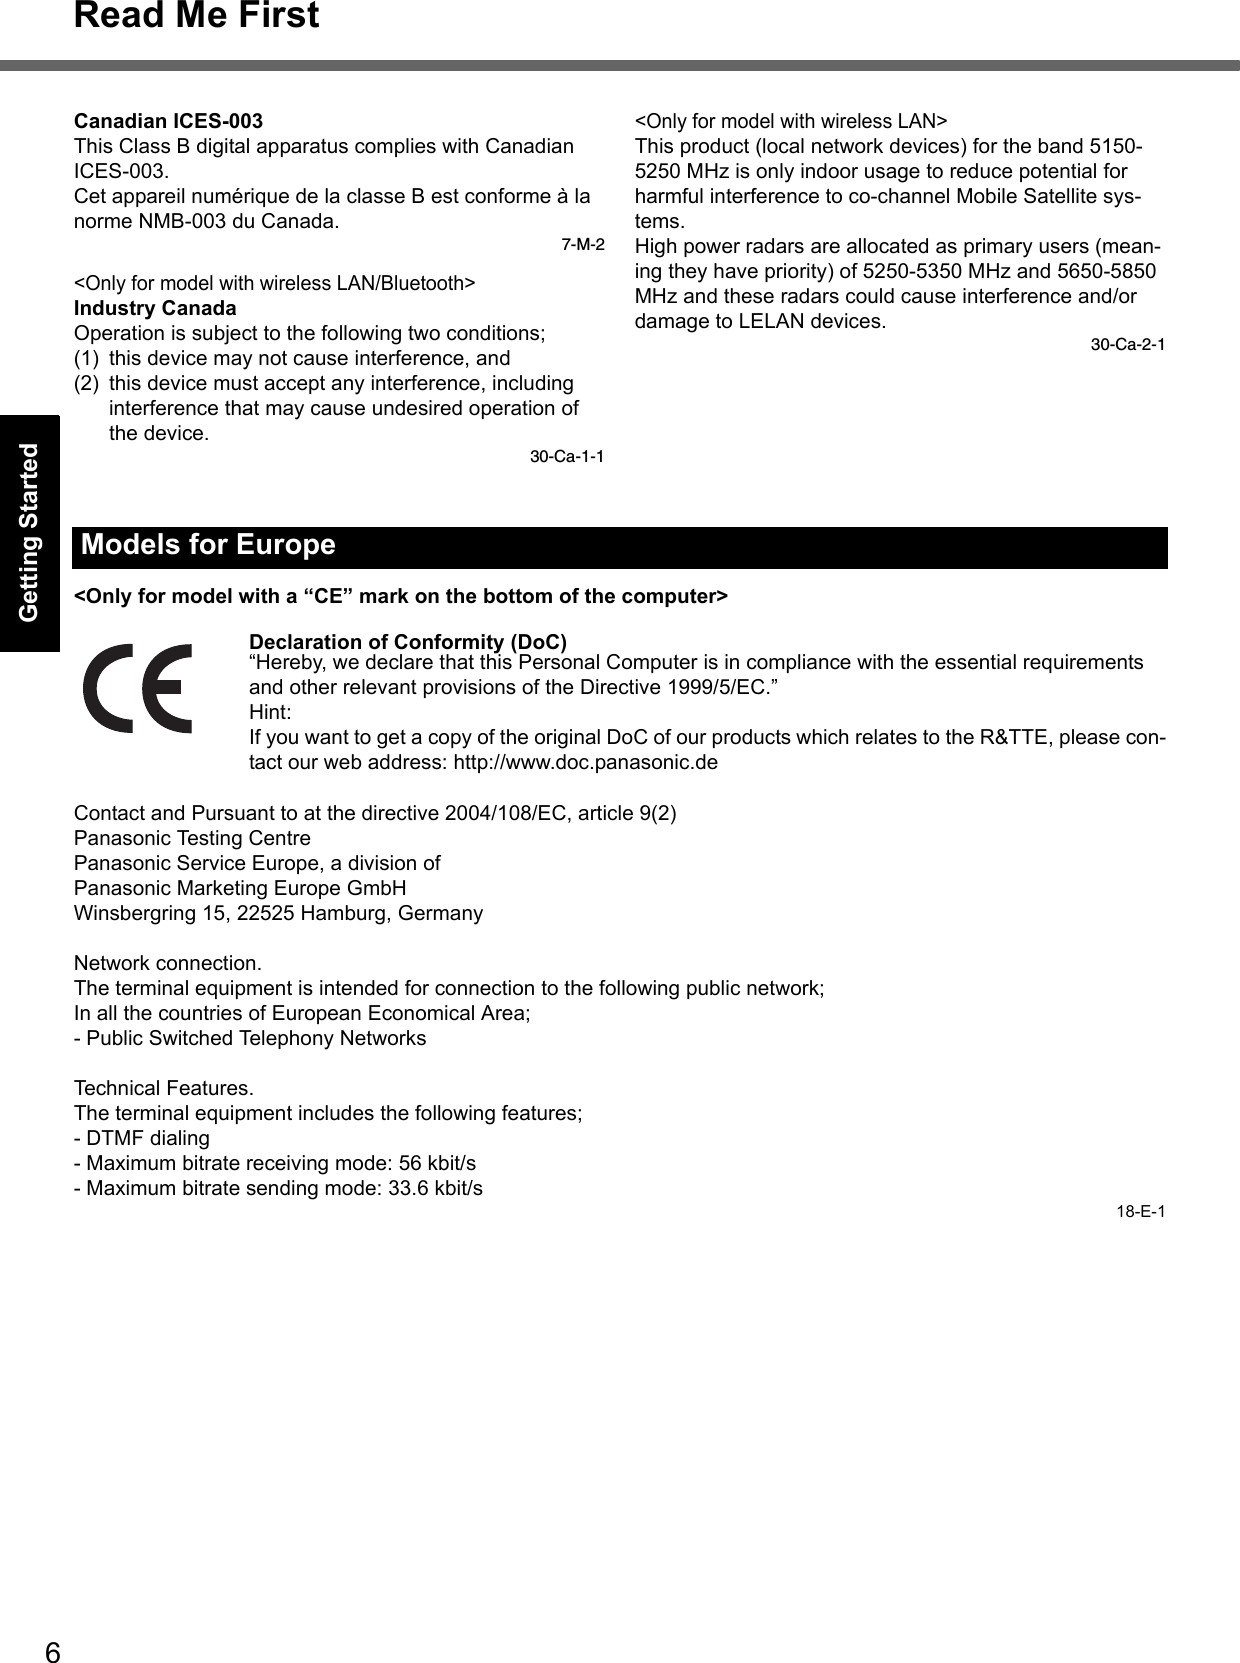 6Read Me FirstGetting StartedUseful InformationTroubleshootingAppendixCanadian ICES-003This Class B digital apparatus complies with Canadian ICES-003.Cet appareil numérique de la classe B est conforme à la norme NMB-003 du Canada.7-M-2&lt;Only for model with wireless LAN/Bluetooth&gt;Industry CanadaOperation is subject to the following two conditions;(1) this device may not cause interference, and(2) this device must accept any interference, including interference that may cause undesired operation of the device.30-Ca-1-1&lt;Only for model with wireless LAN&gt;This product (local network devices) for the band 5150-5250 MHz is only indoor usage to reduce potential for harmful interference to co-channel Mobile Satellite sys-tems.High power radars are allocated as primary users (mean-ing they have priority) of 5250-5350 MHz and 5650-5850 MHz and these radars could cause interference and/or damage to LELAN devices.30-Ca-2-1&lt;Only for model with a “CE” mark on the bottom of the computer&gt;Declaration of Conformity (DoC)“Hereby, we declare that this Personal Computer is in compliance with the essential requirements and other relevant provisions of the Directive 1999/5/EC.”Hint:If you want to get a copy of the original DoC of our products which relates to the R&amp;TTE, please con-tact our web address: http://www.doc.panasonic.deContact and Pursuant to at the directive 2004/108/EC, article 9(2)Panasonic Testing CentrePanasonic Service Europe, a division ofPanasonic Marketing Europe GmbHWinsbergring 15, 22525 Hamburg, GermanyNetwork connection.The terminal equipment is intended for connection to the following public network;In all the countries of European Economical Area;- Public Switched Telephony NetworksTechnical Features.The terminal equipment includes the following features;- DTMF dialing- Maximum bitrate receiving mode: 56 kbit/s- Maximum bitrate sending mode: 33.6 kbit/s18-E-1Models for Europe